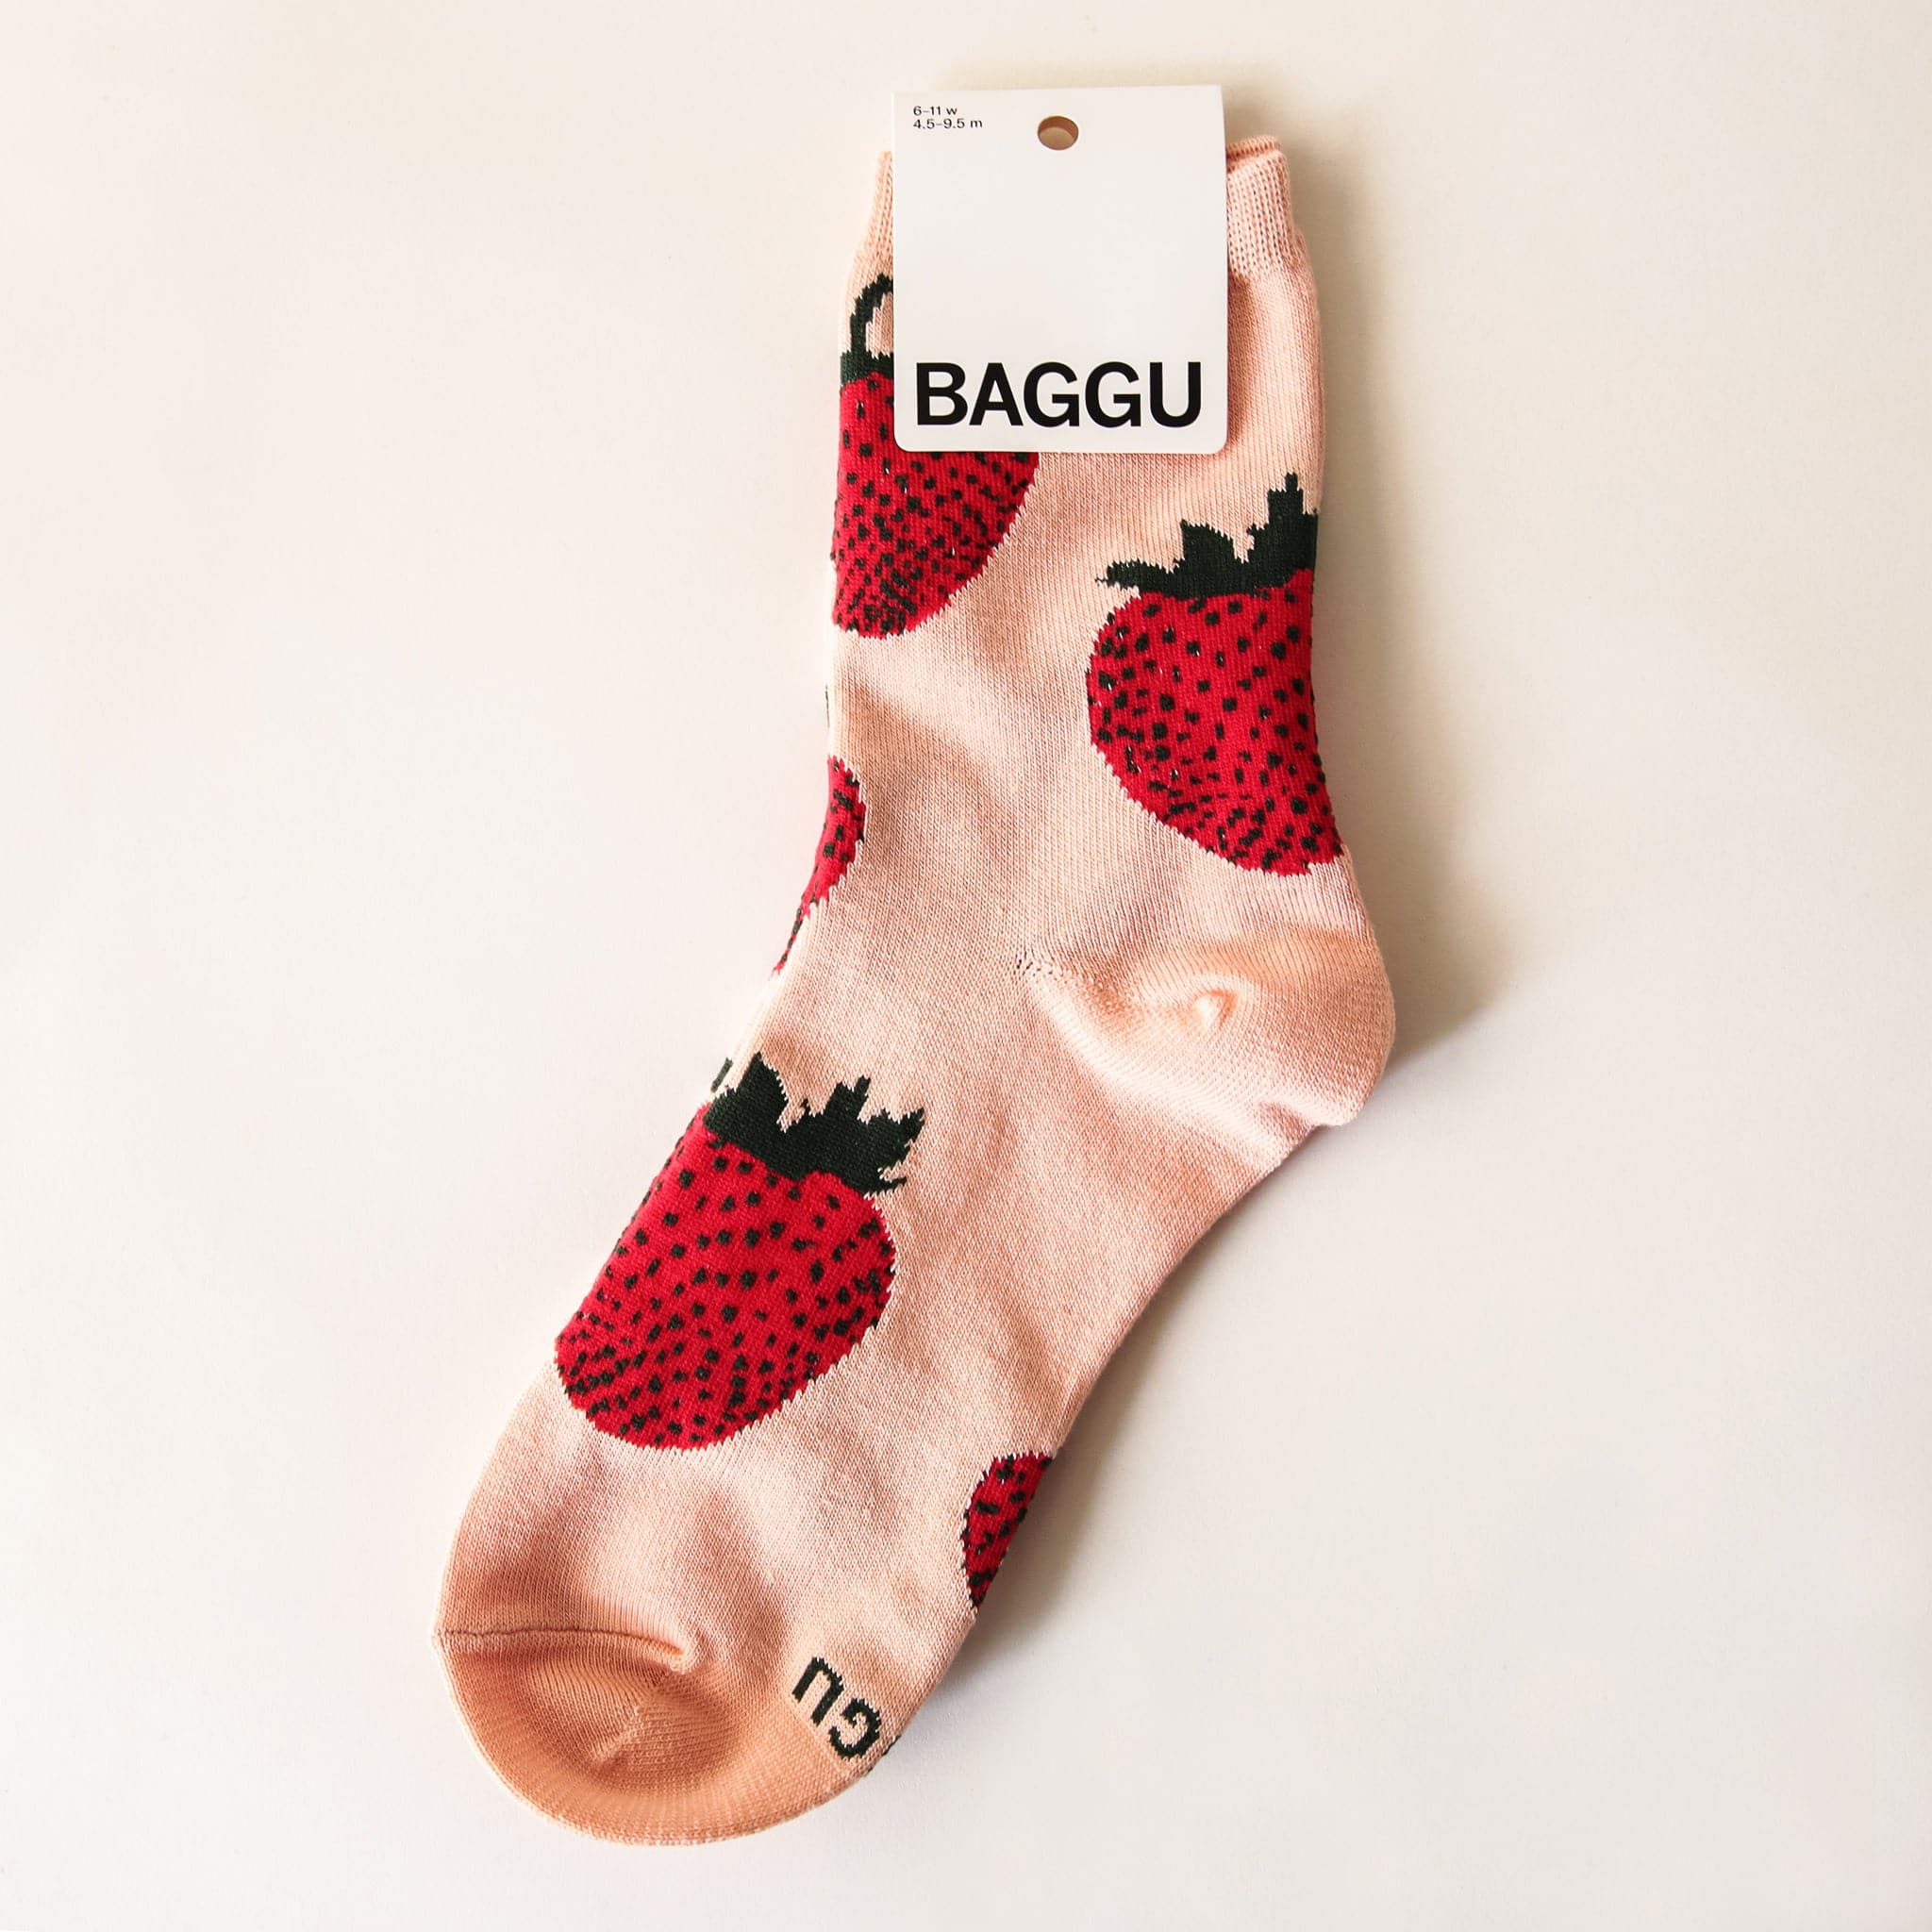 In front of a tan background is a pink, ankle sock with red strawberries on it. The strawberries have black dots and green leaves on top. At the top of the sock is a white tag with black text that reads ‘Baggu.’ 